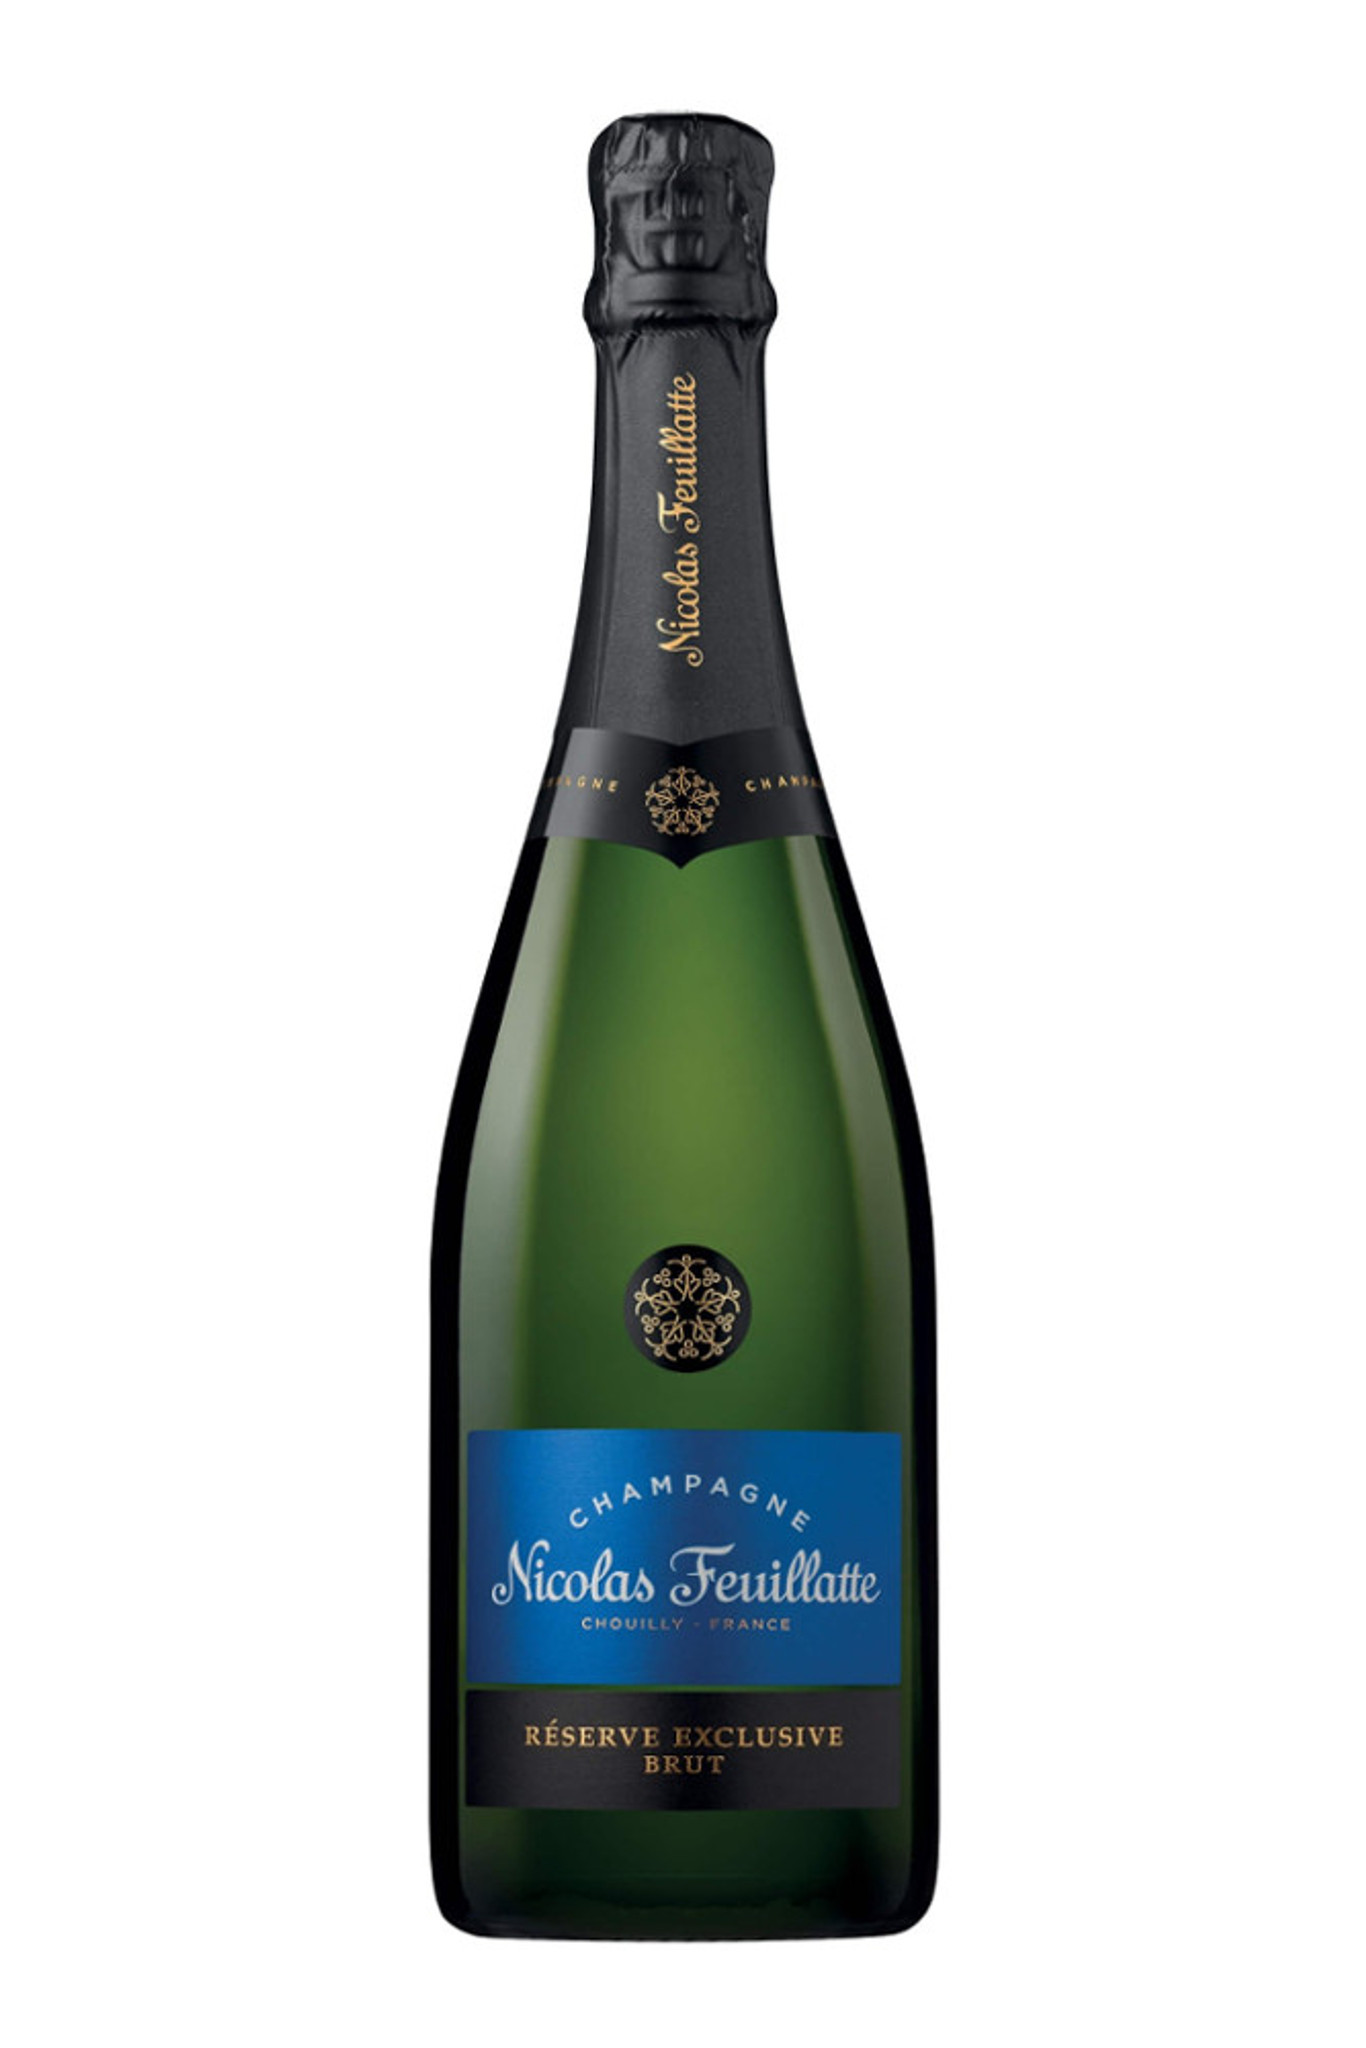 Nicolas Feuillatte Tin box Limited Brut Edition Champagne used